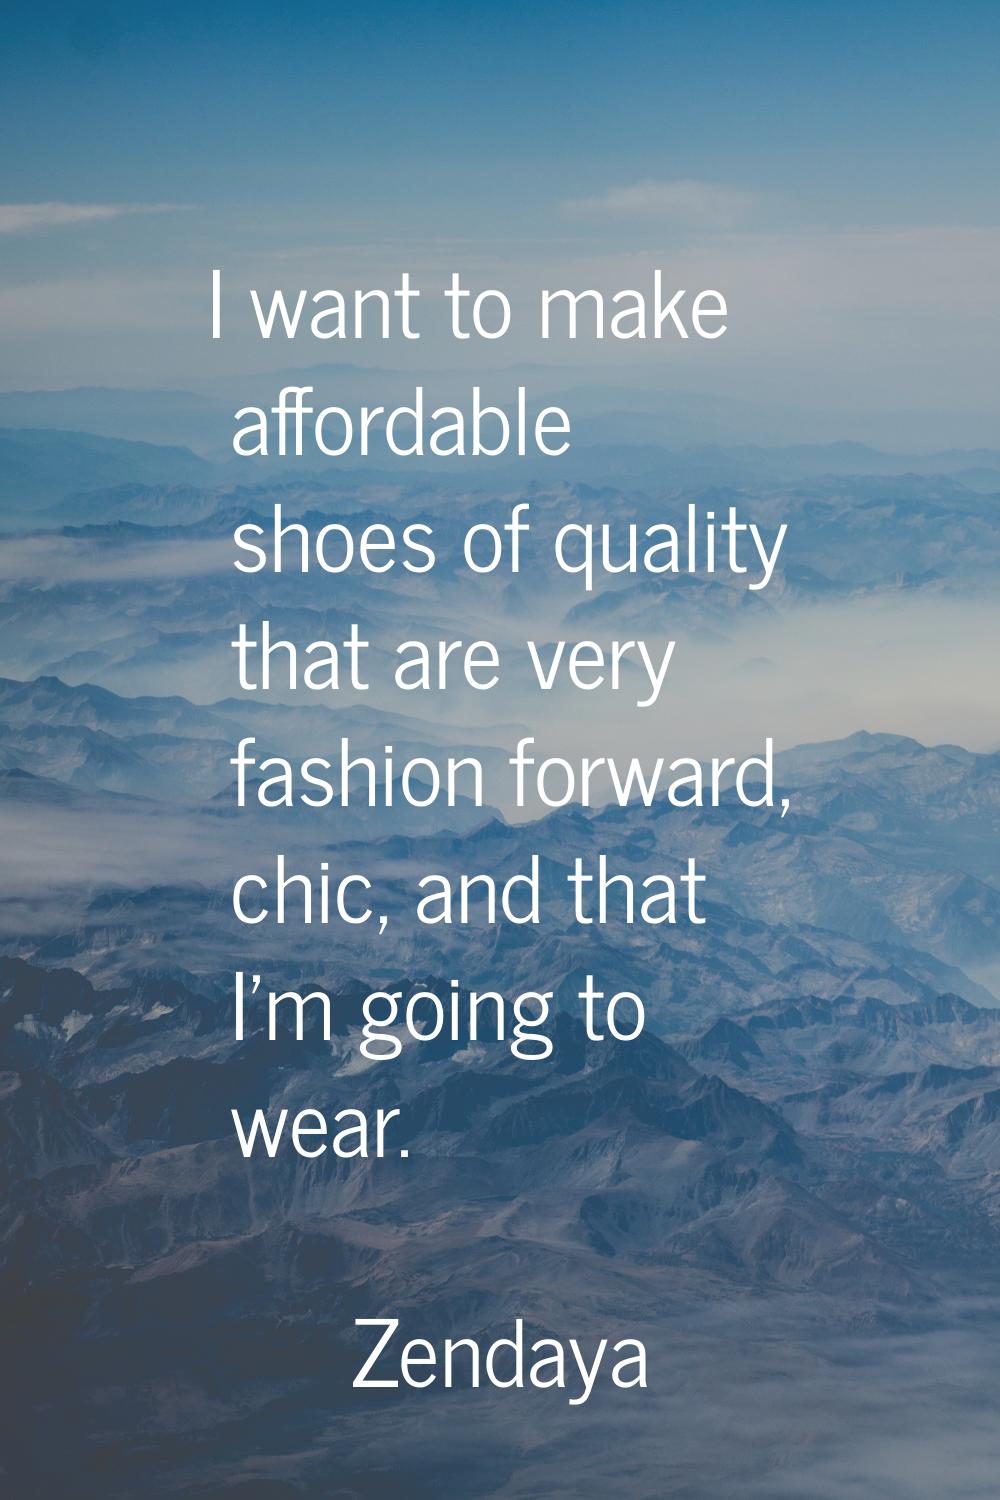 I want to make affordable shoes of quality that are very fashion forward, chic, and that I'm going 